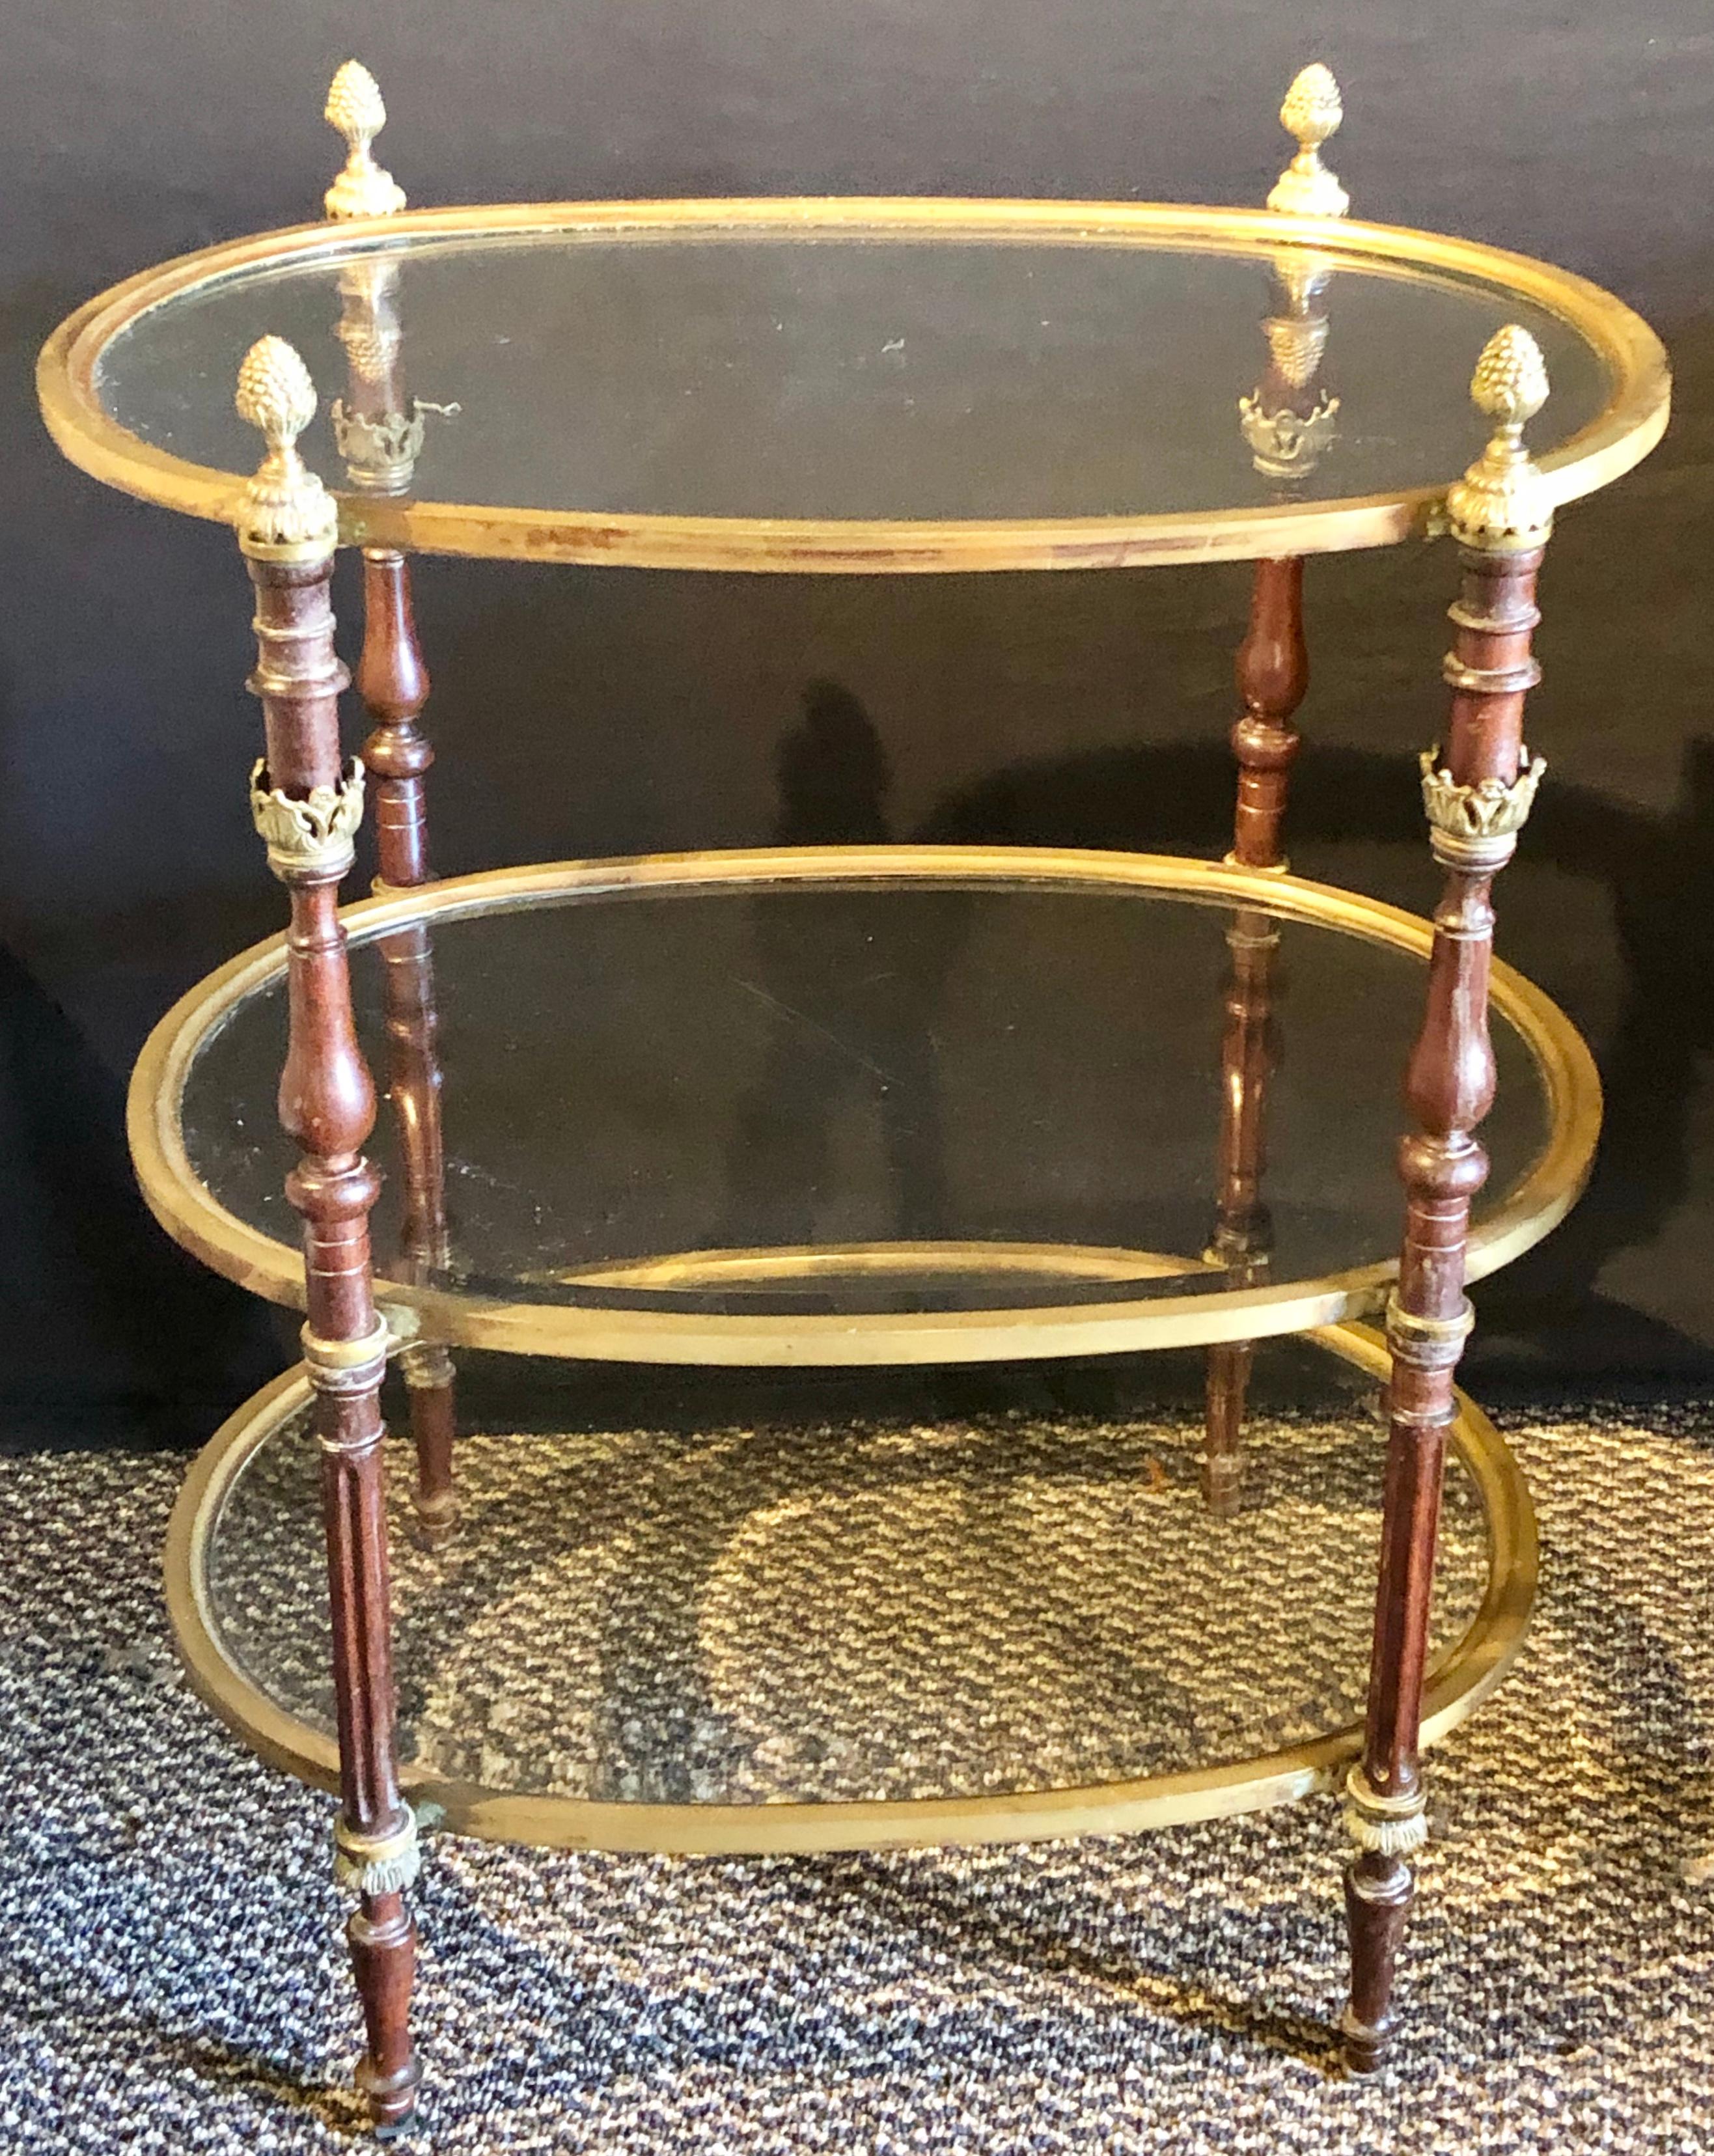 A three-tier bronze and mahogany beveled glass dessert stand in the manner of Maison Jansen. The burgundy colored column form sides terminating in bronze finials supporting three oval glass bronze framed shelves making for a lovely display.